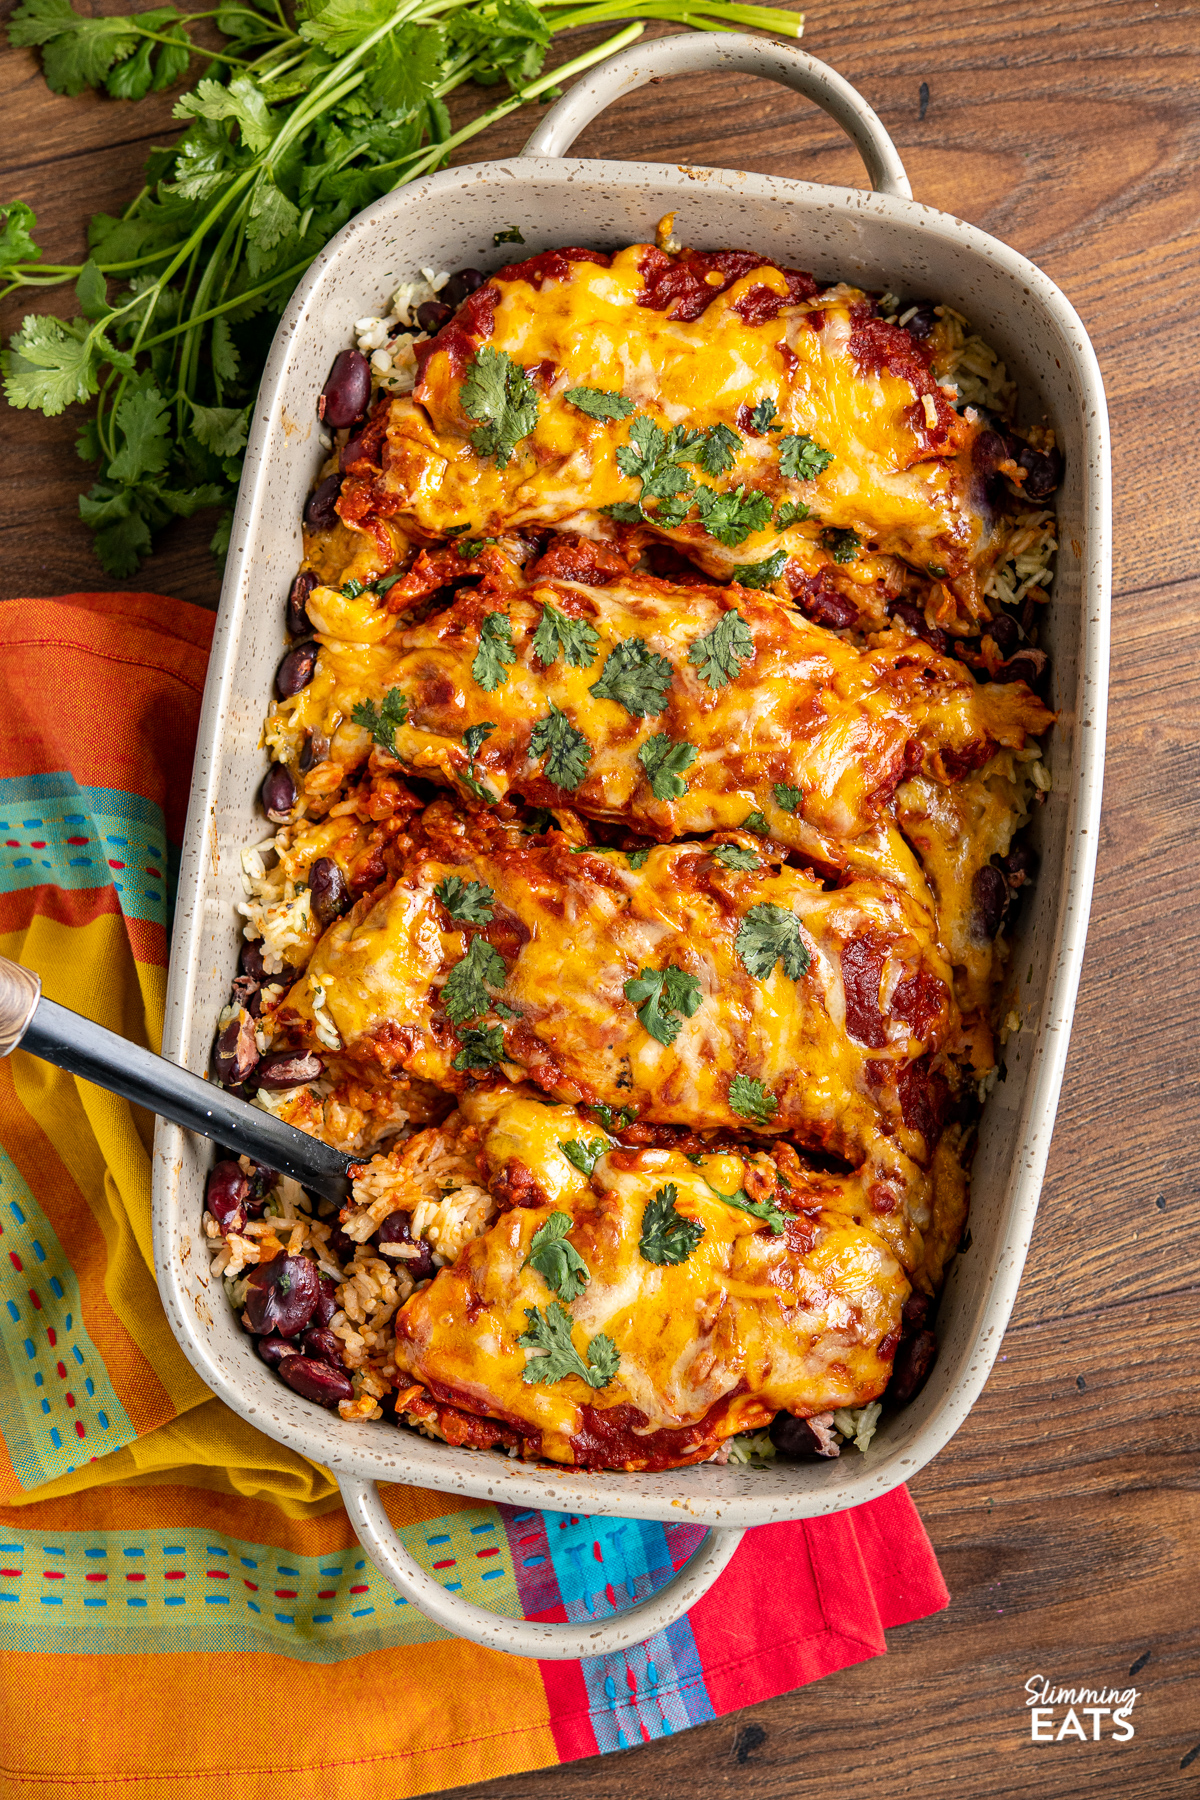 Mexican Chicken and Rice Bake in brown grey ceramic baking dish with two handles placed on a bright colour towel on wooden surface